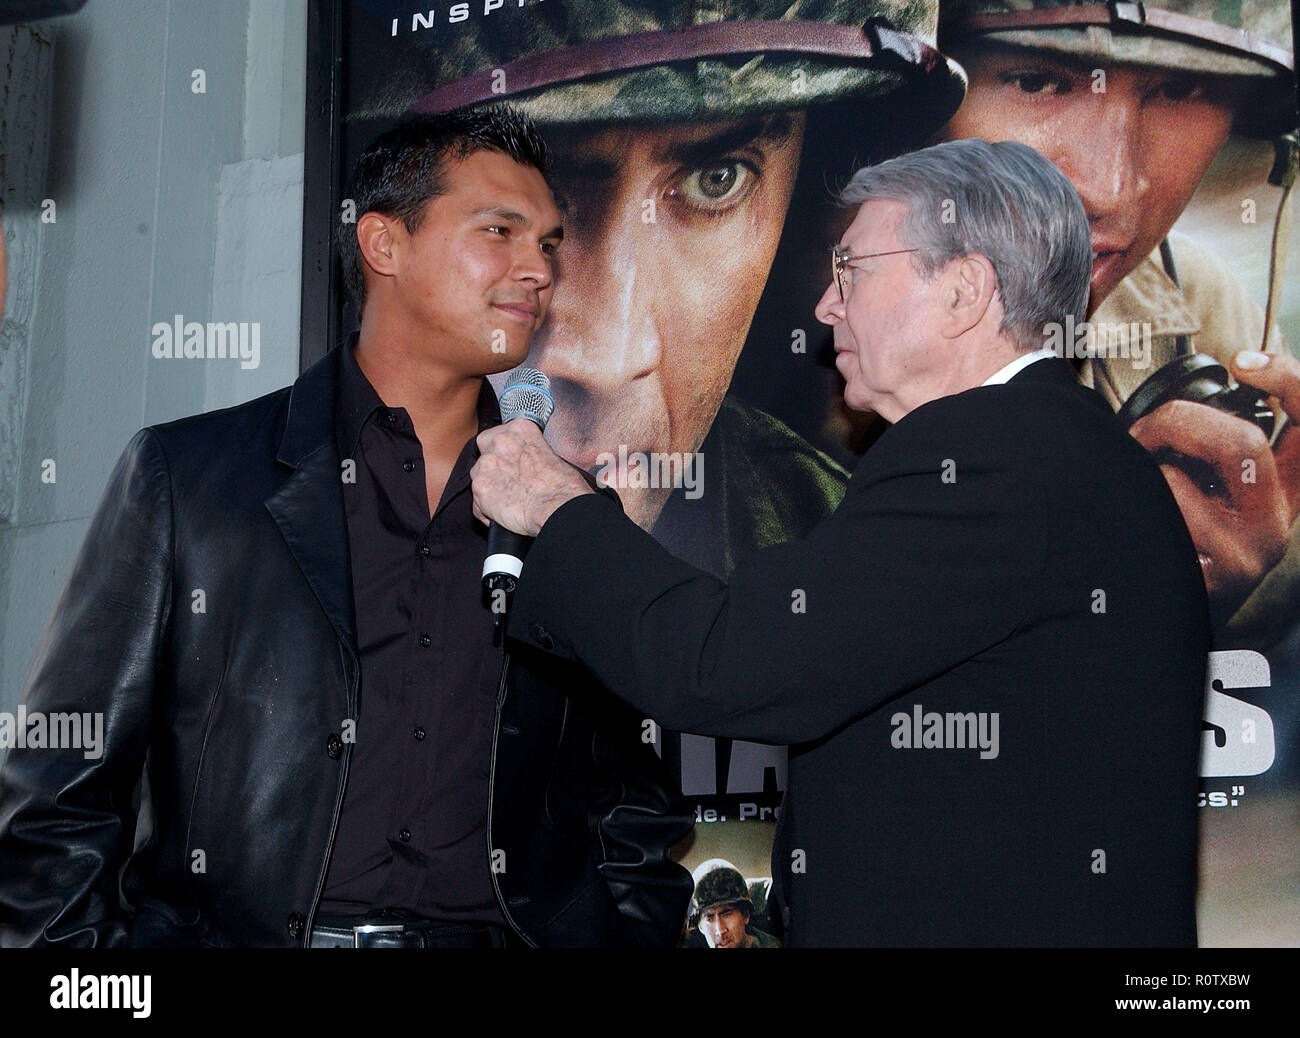 Army Archerd and Adam Beach at the Windtalkers premiere at the Chinese Theatre in Los Angeles. June 11, 2002.          -            ArcherdA BeachA02. Stock Photo